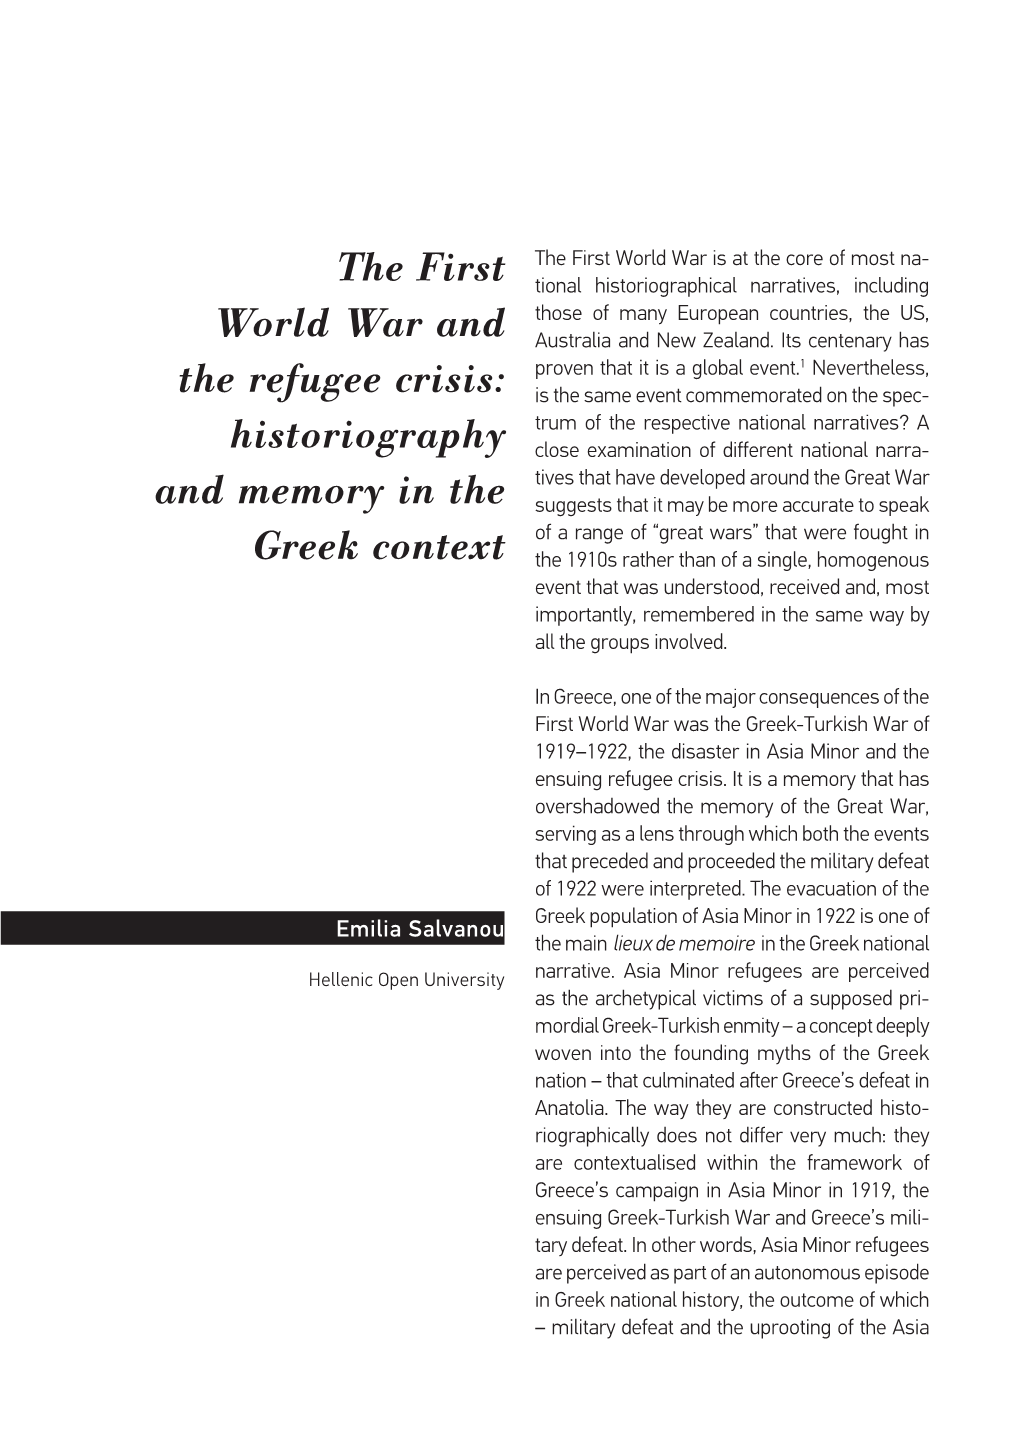 The First World War and the Refugee Crisis